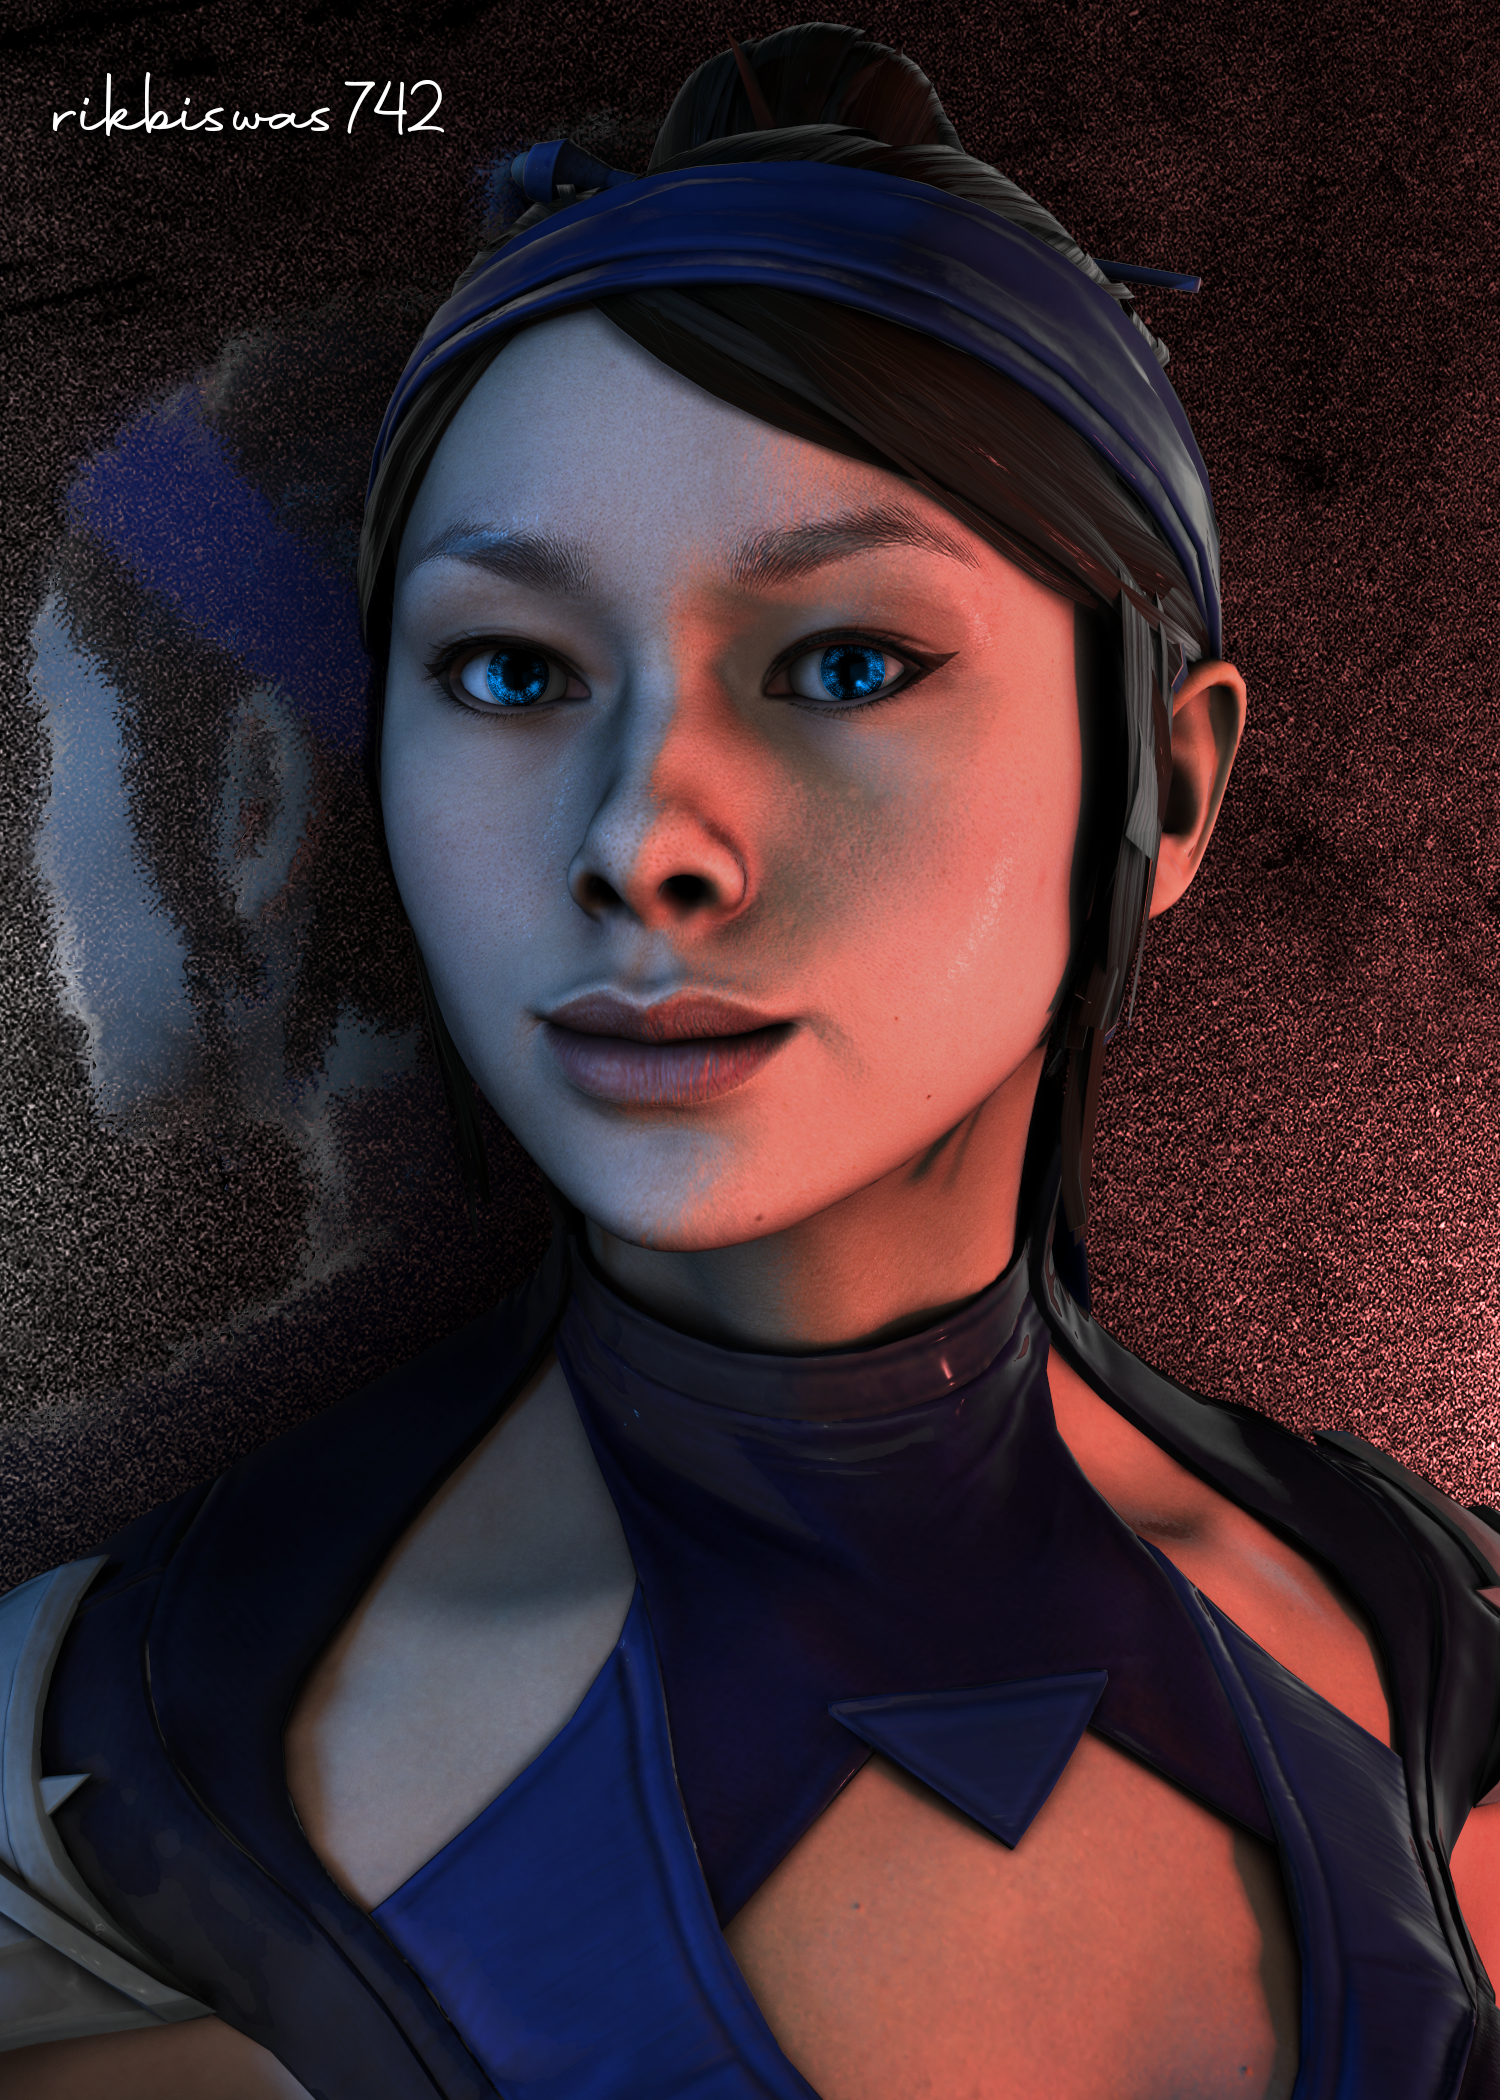 Made this render of Kitana from MK11. If you want some kind image( Wallpaper, DP, Banner, Thumbnail ) of any Character, DM me